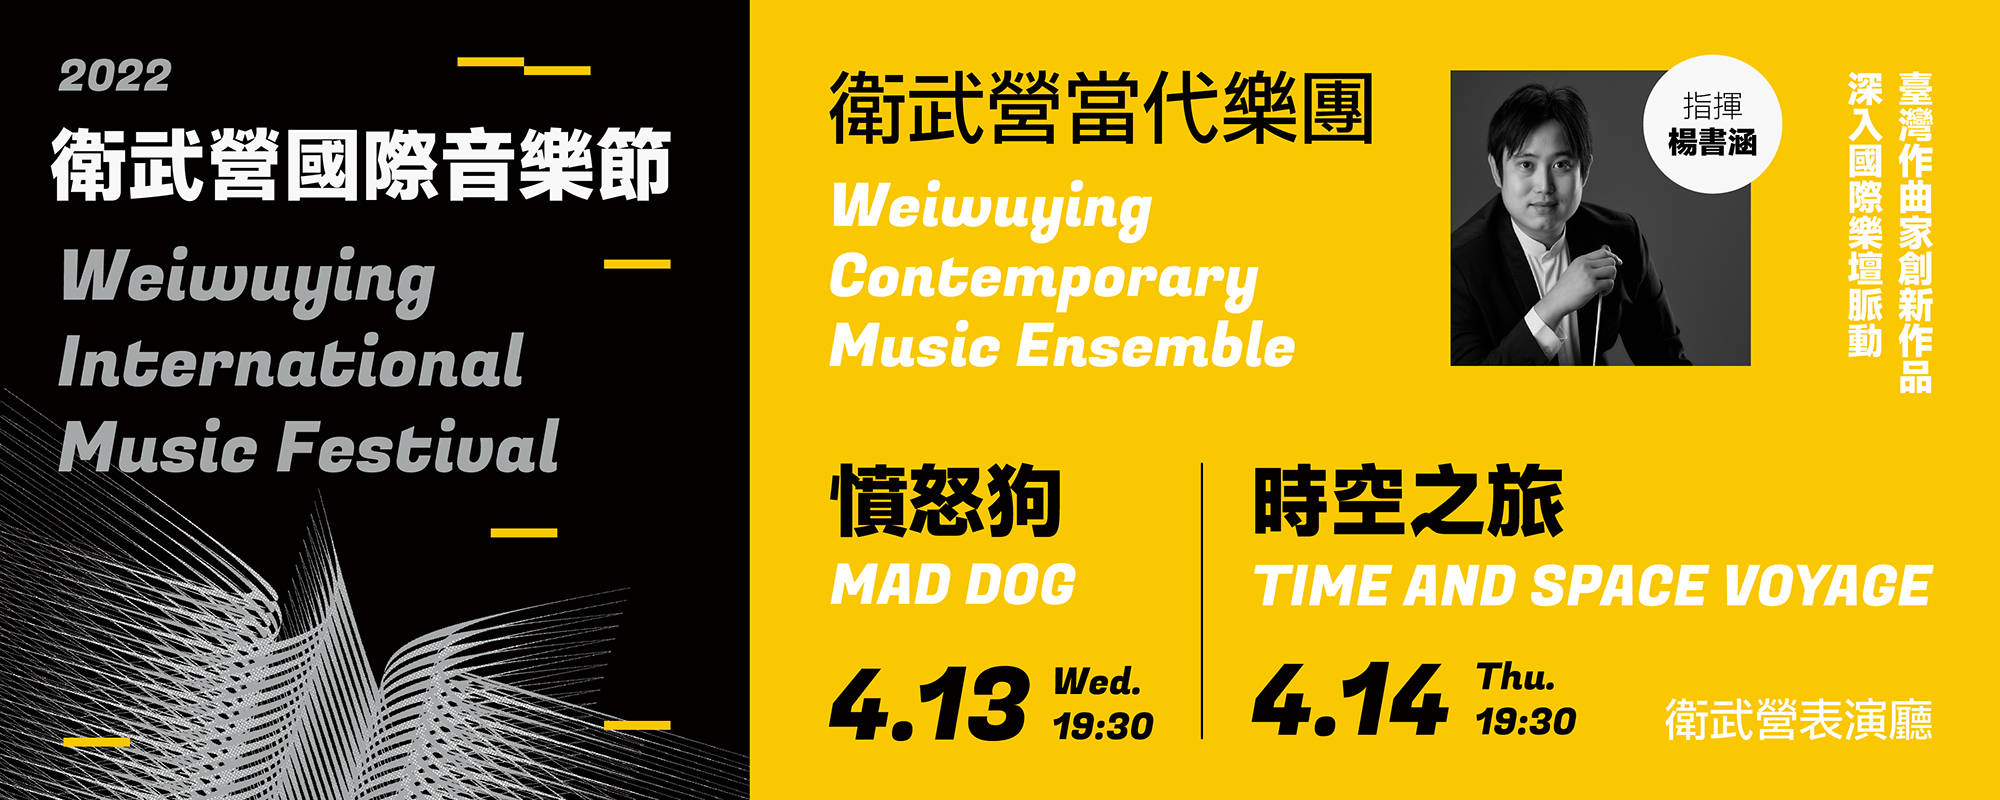 【2022 Weiwuying Intearnational Music Festival】Weiwuying Contemporary Music Ensemble "Mad dog" & "Time and Space Voyage"  